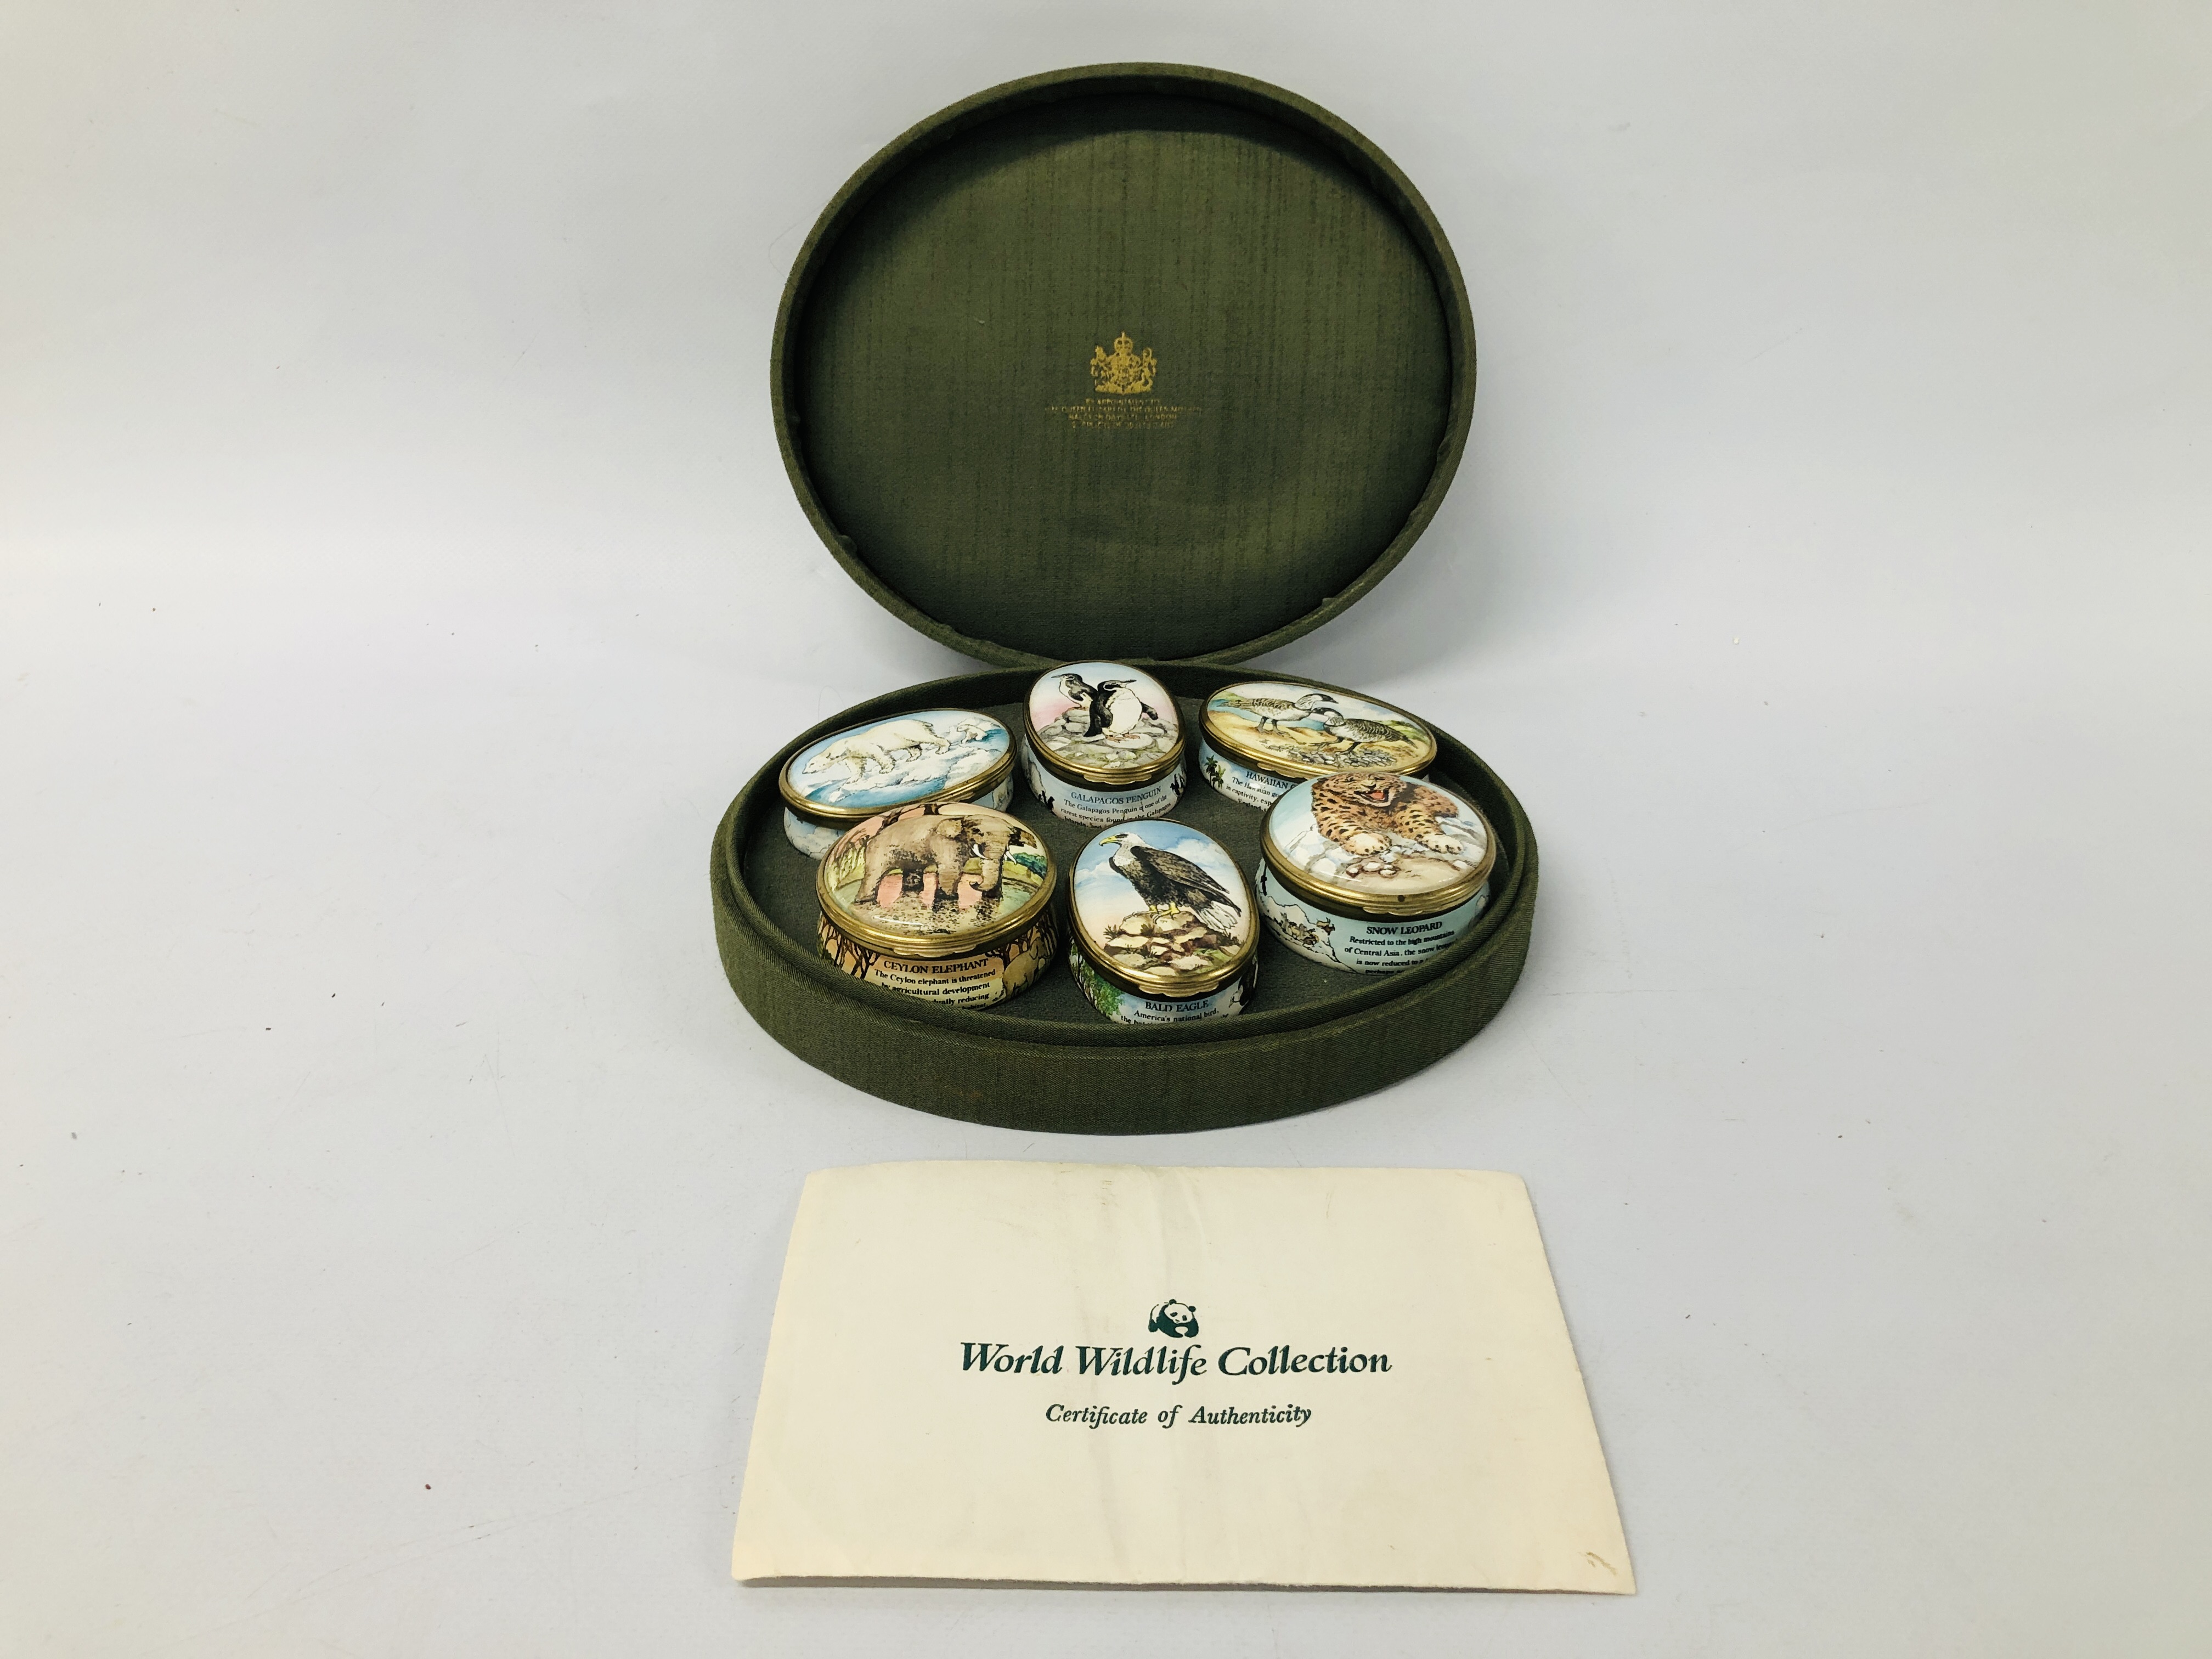 CASED SET OF 6 BILSTON AND BATTERSEA ENAMELS "WORLD WILDLIFE COLLECTION" LIMITED EDITION 106/350